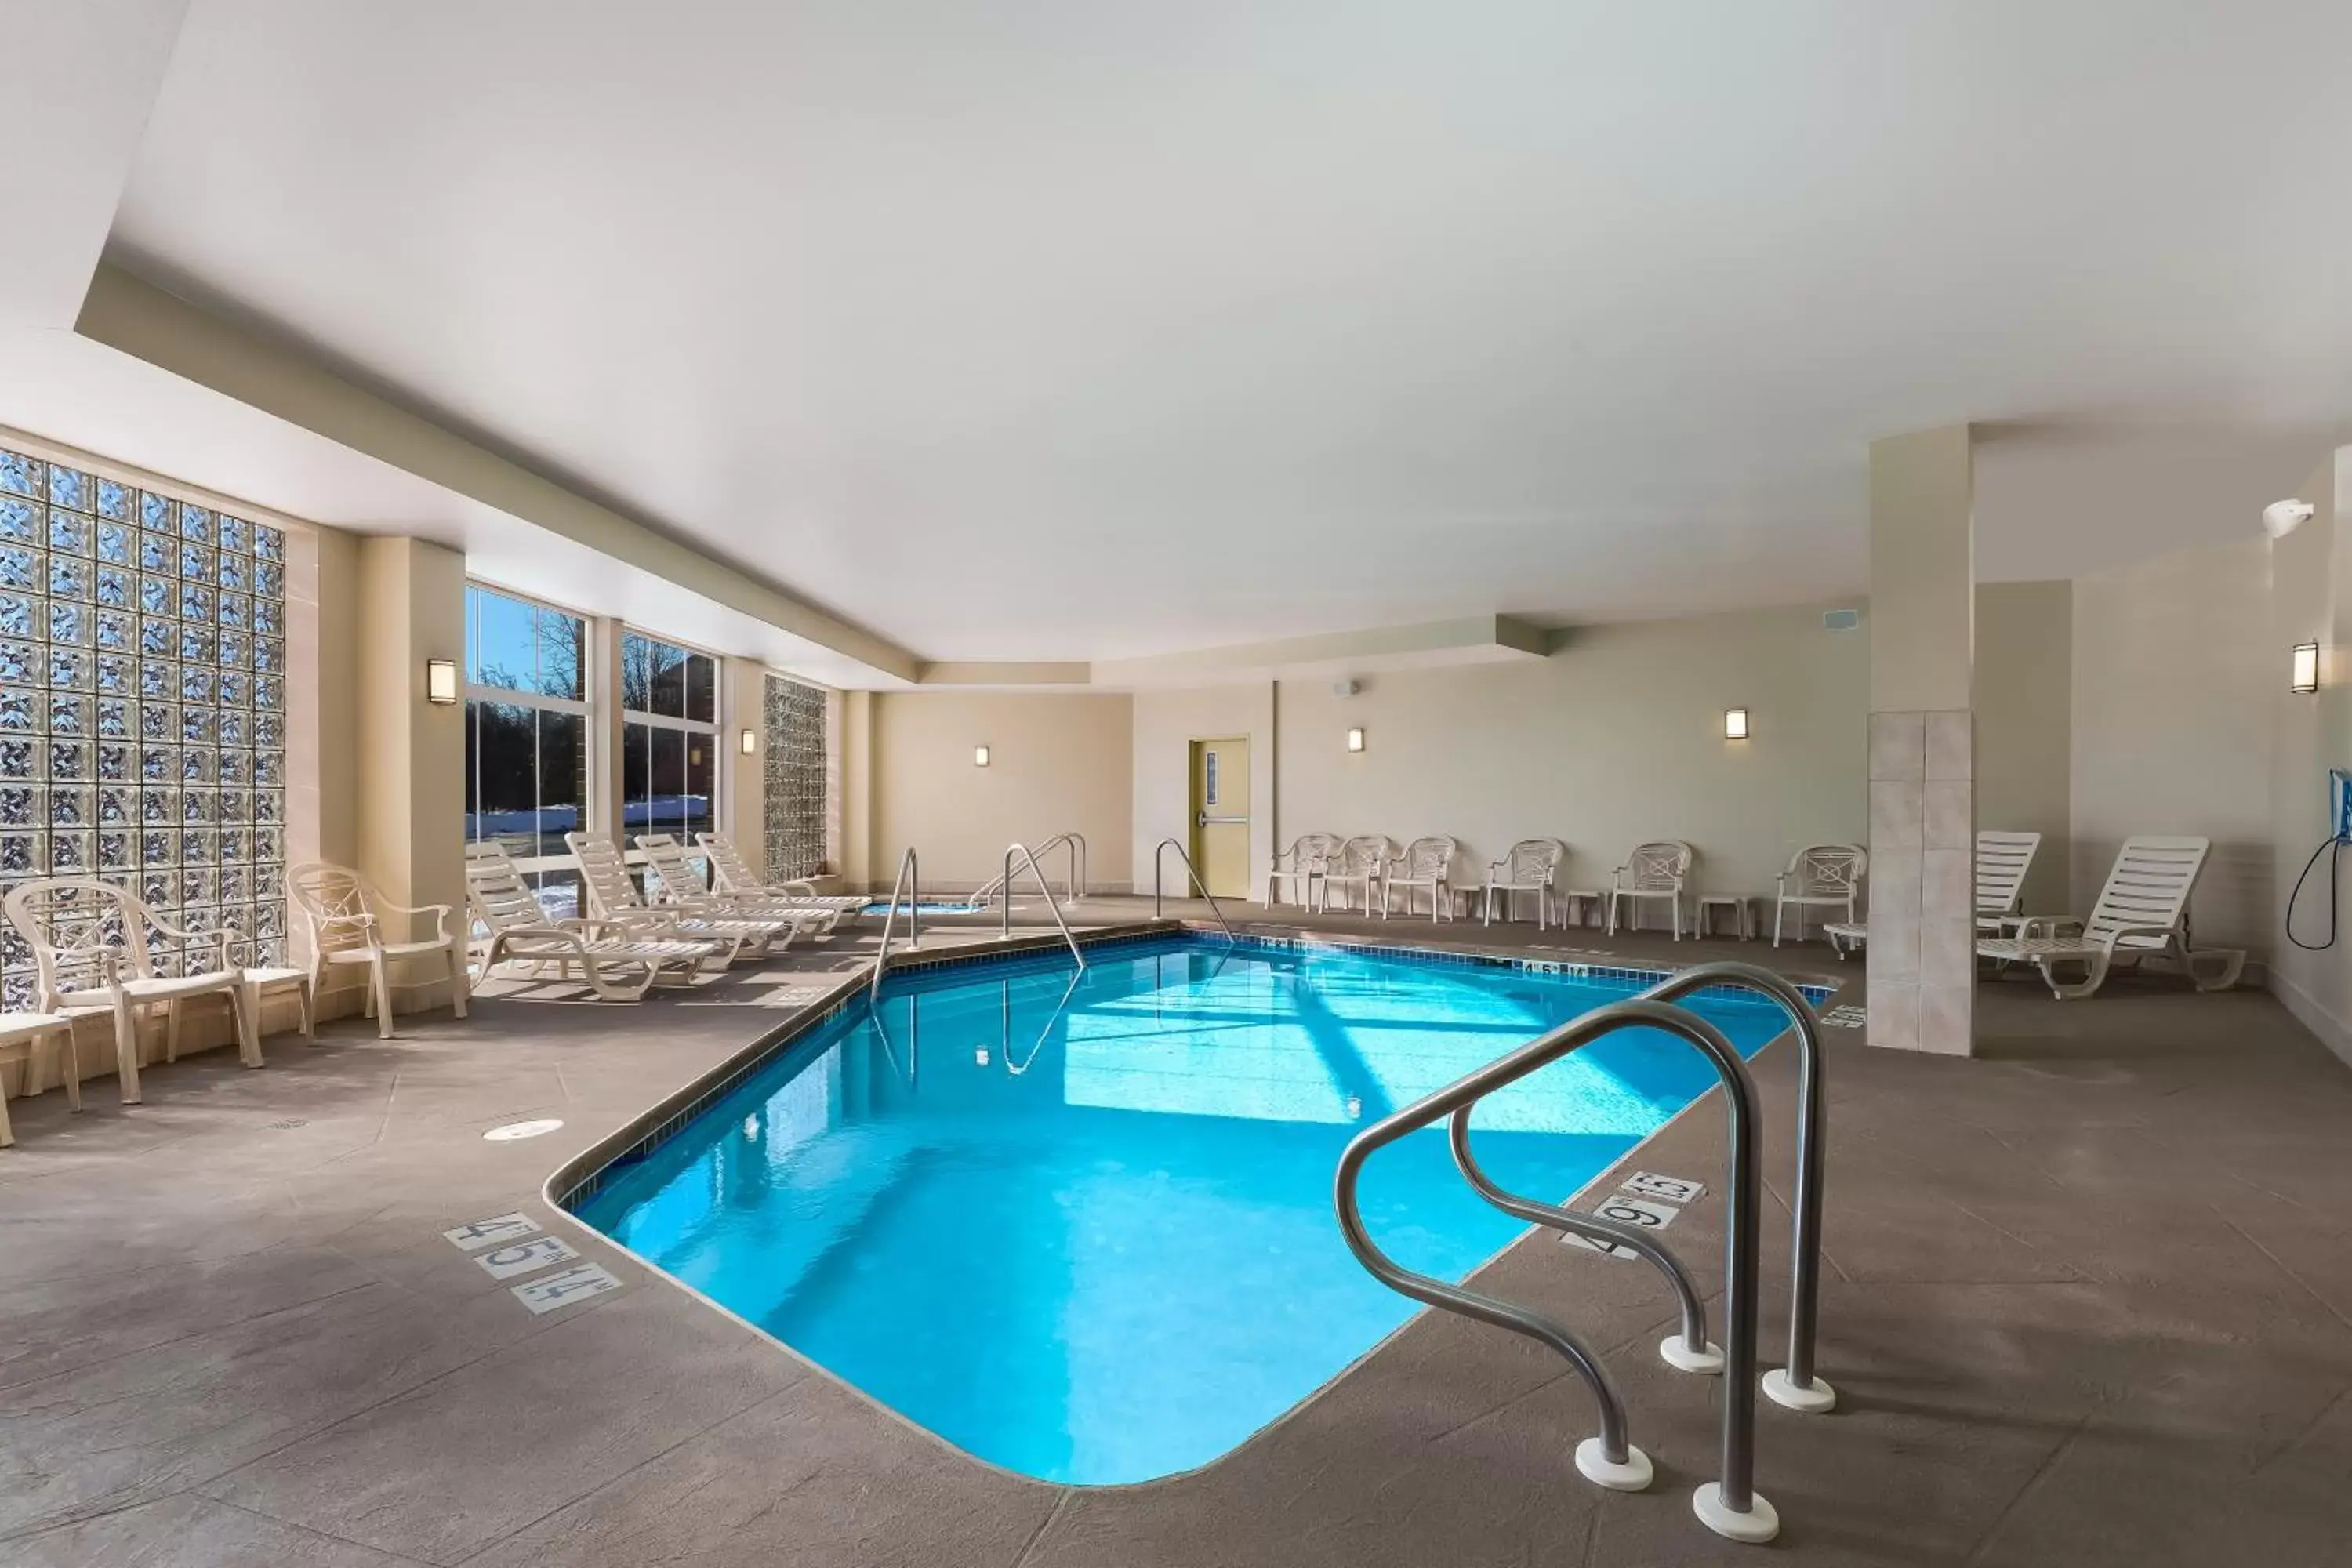 Swimming Pool in MainStay Suites Fitchburg - Madison